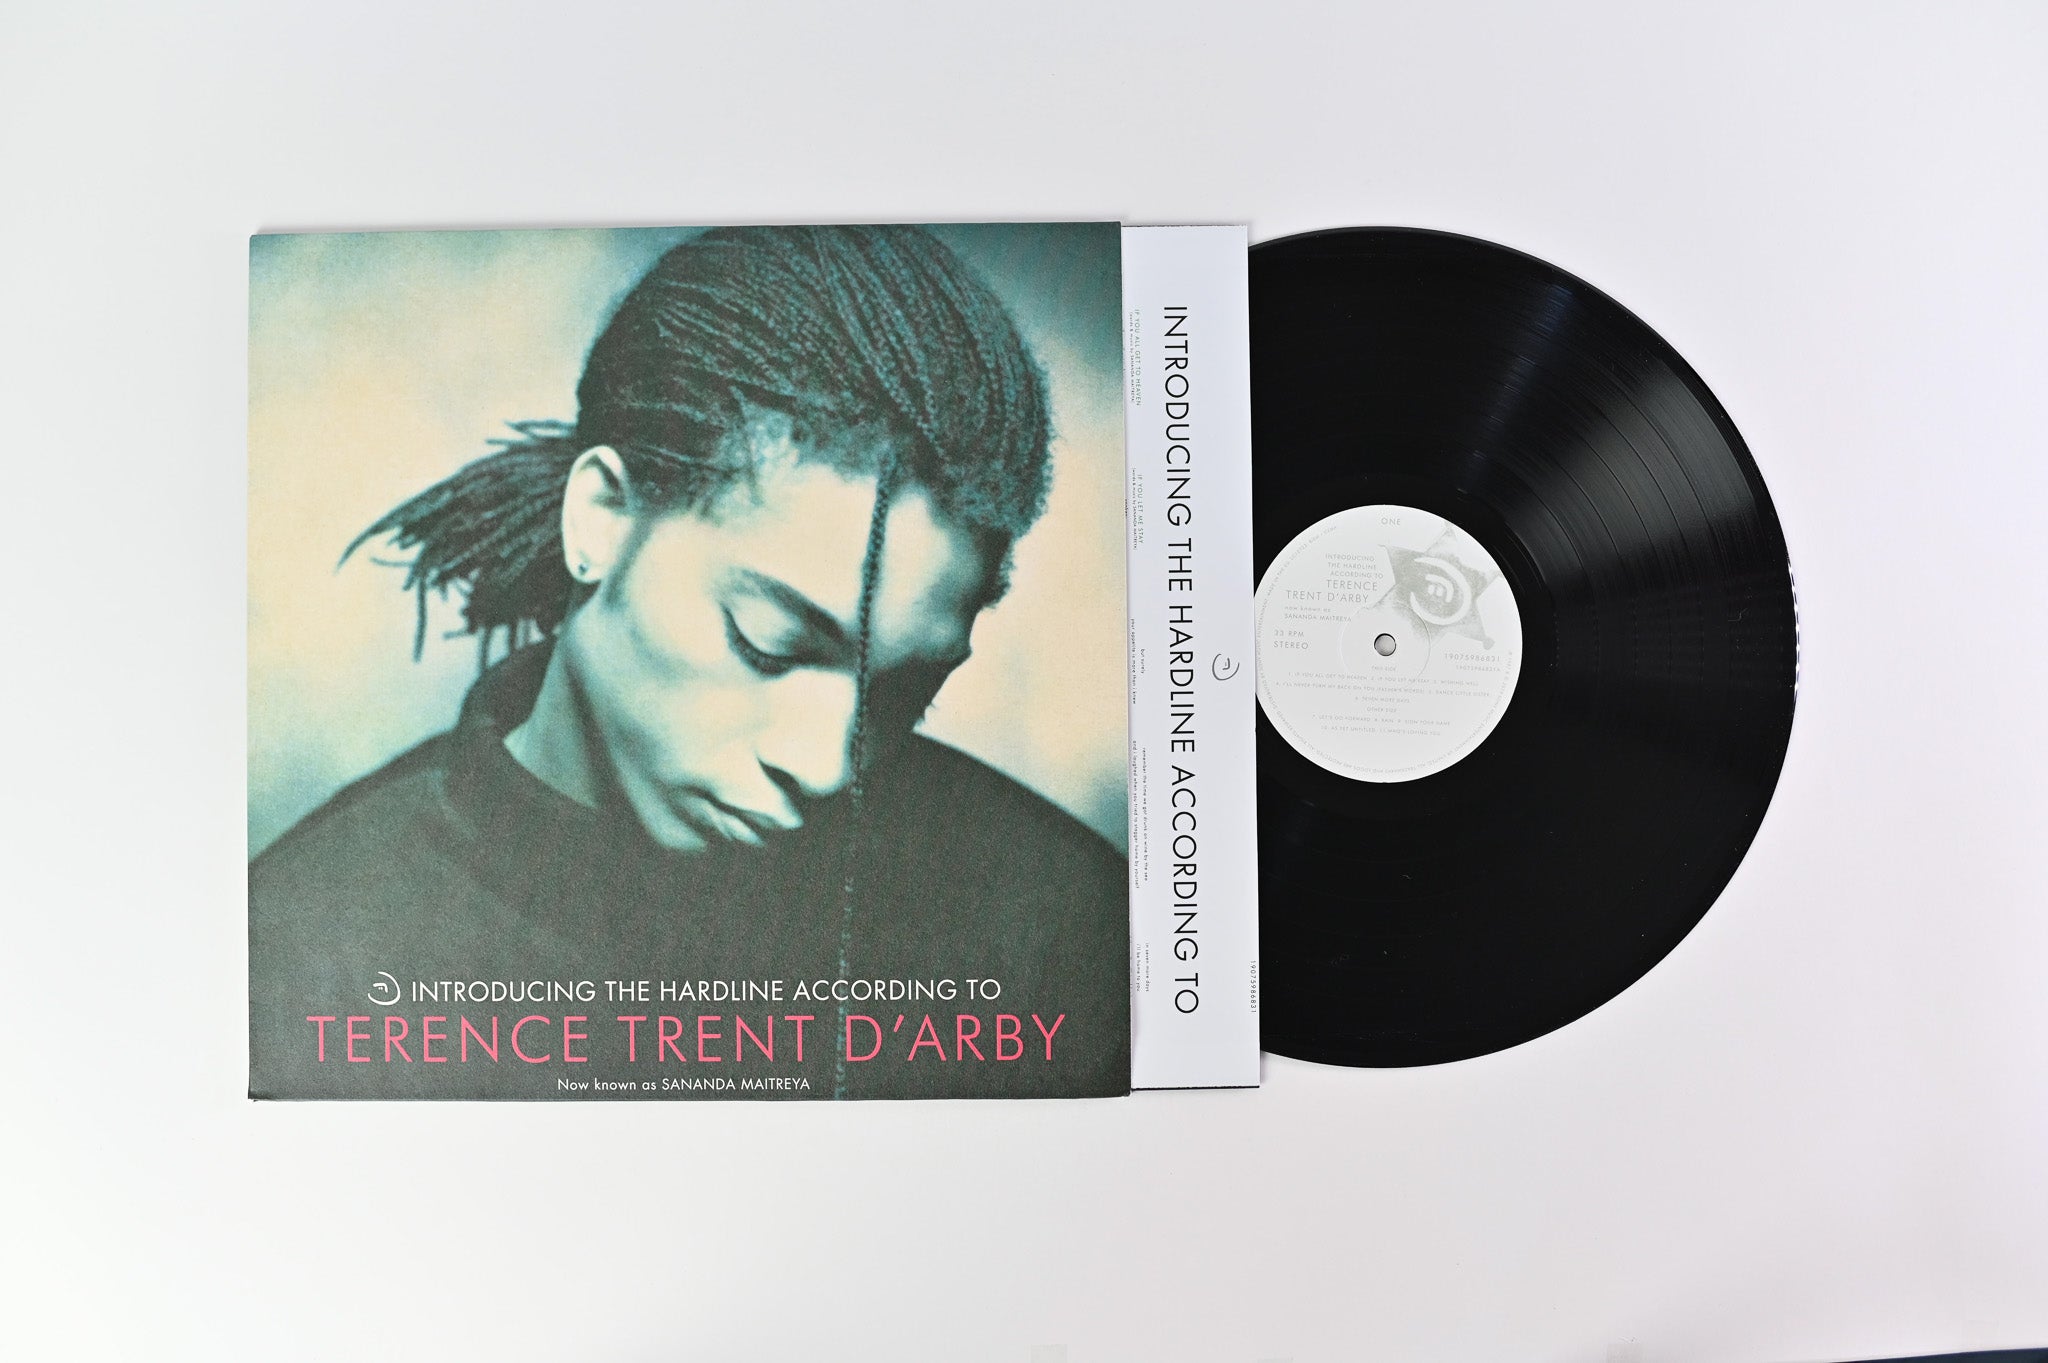 Terence Trent D'Arby - Introducing The Hardline According To Terence Trent D'Arby on Sony Reissue